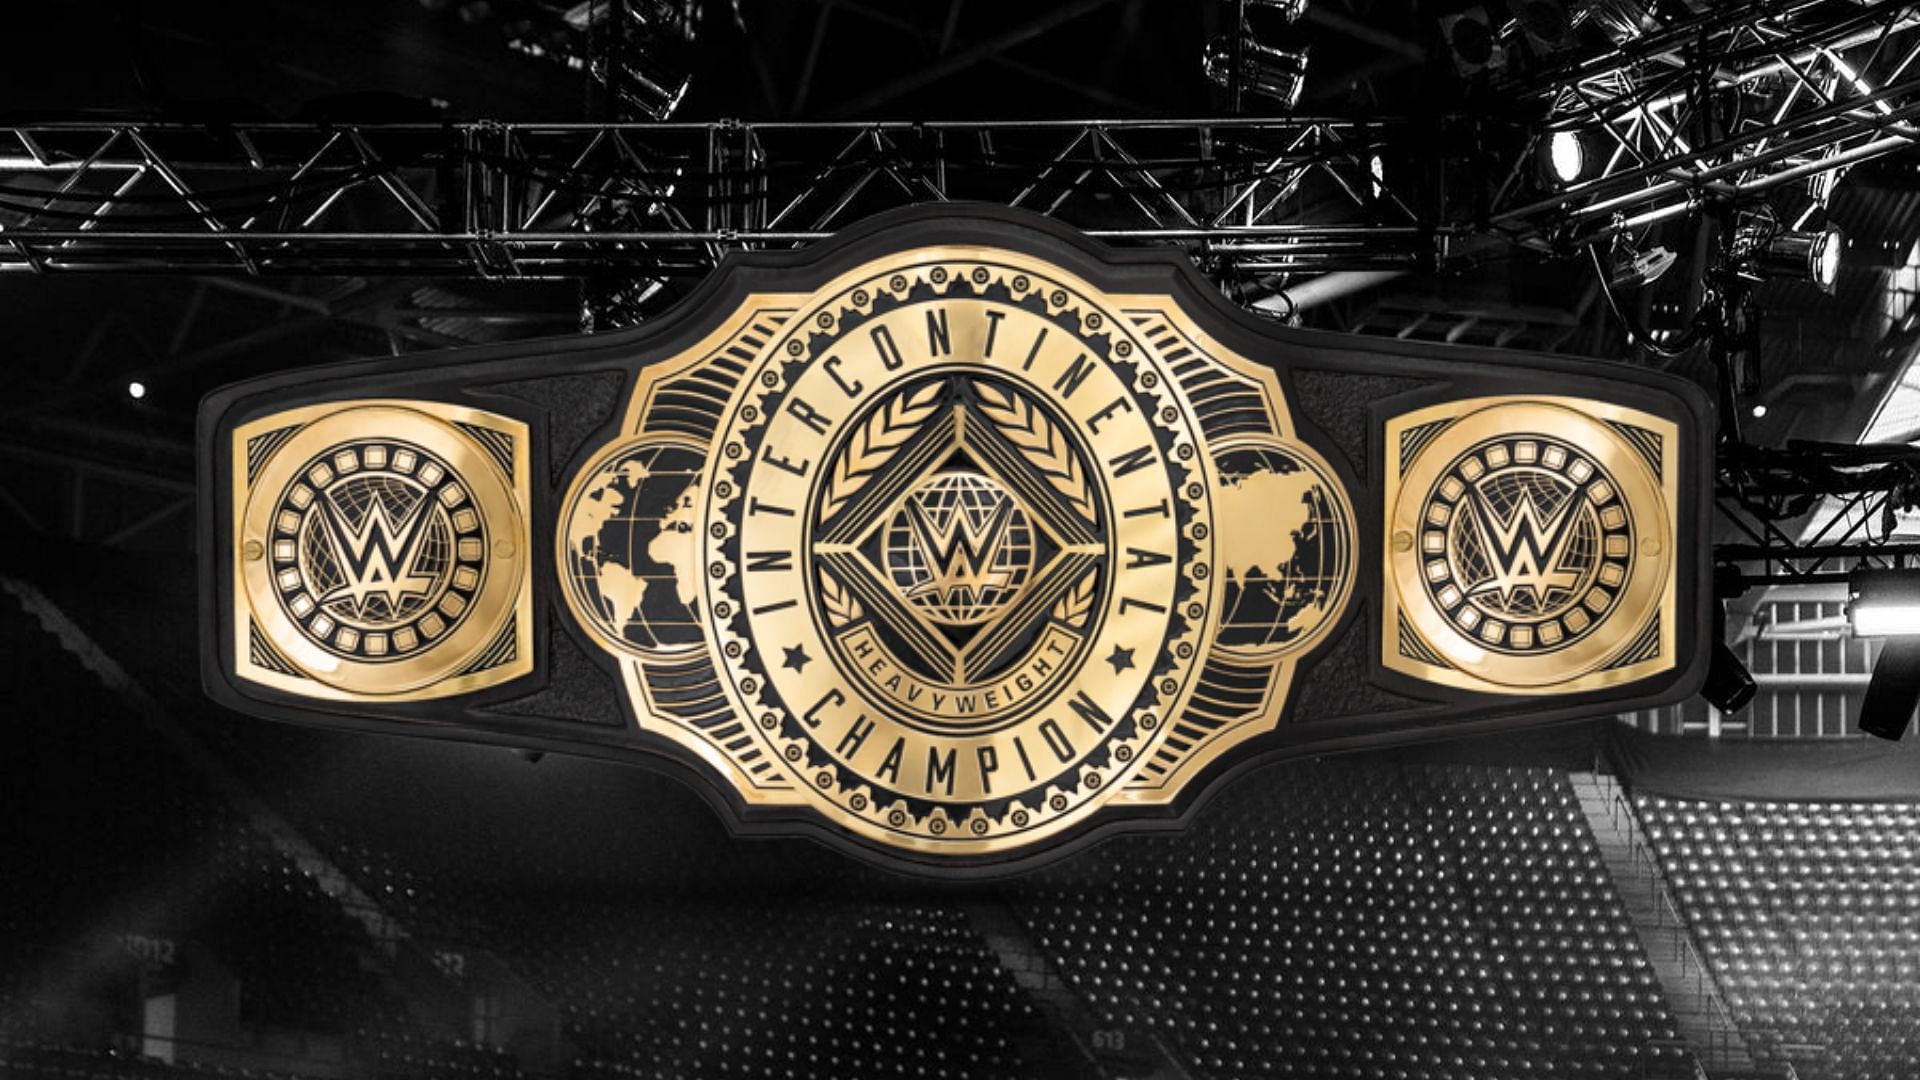 In 2019, new Intercontinental belt was introduced!